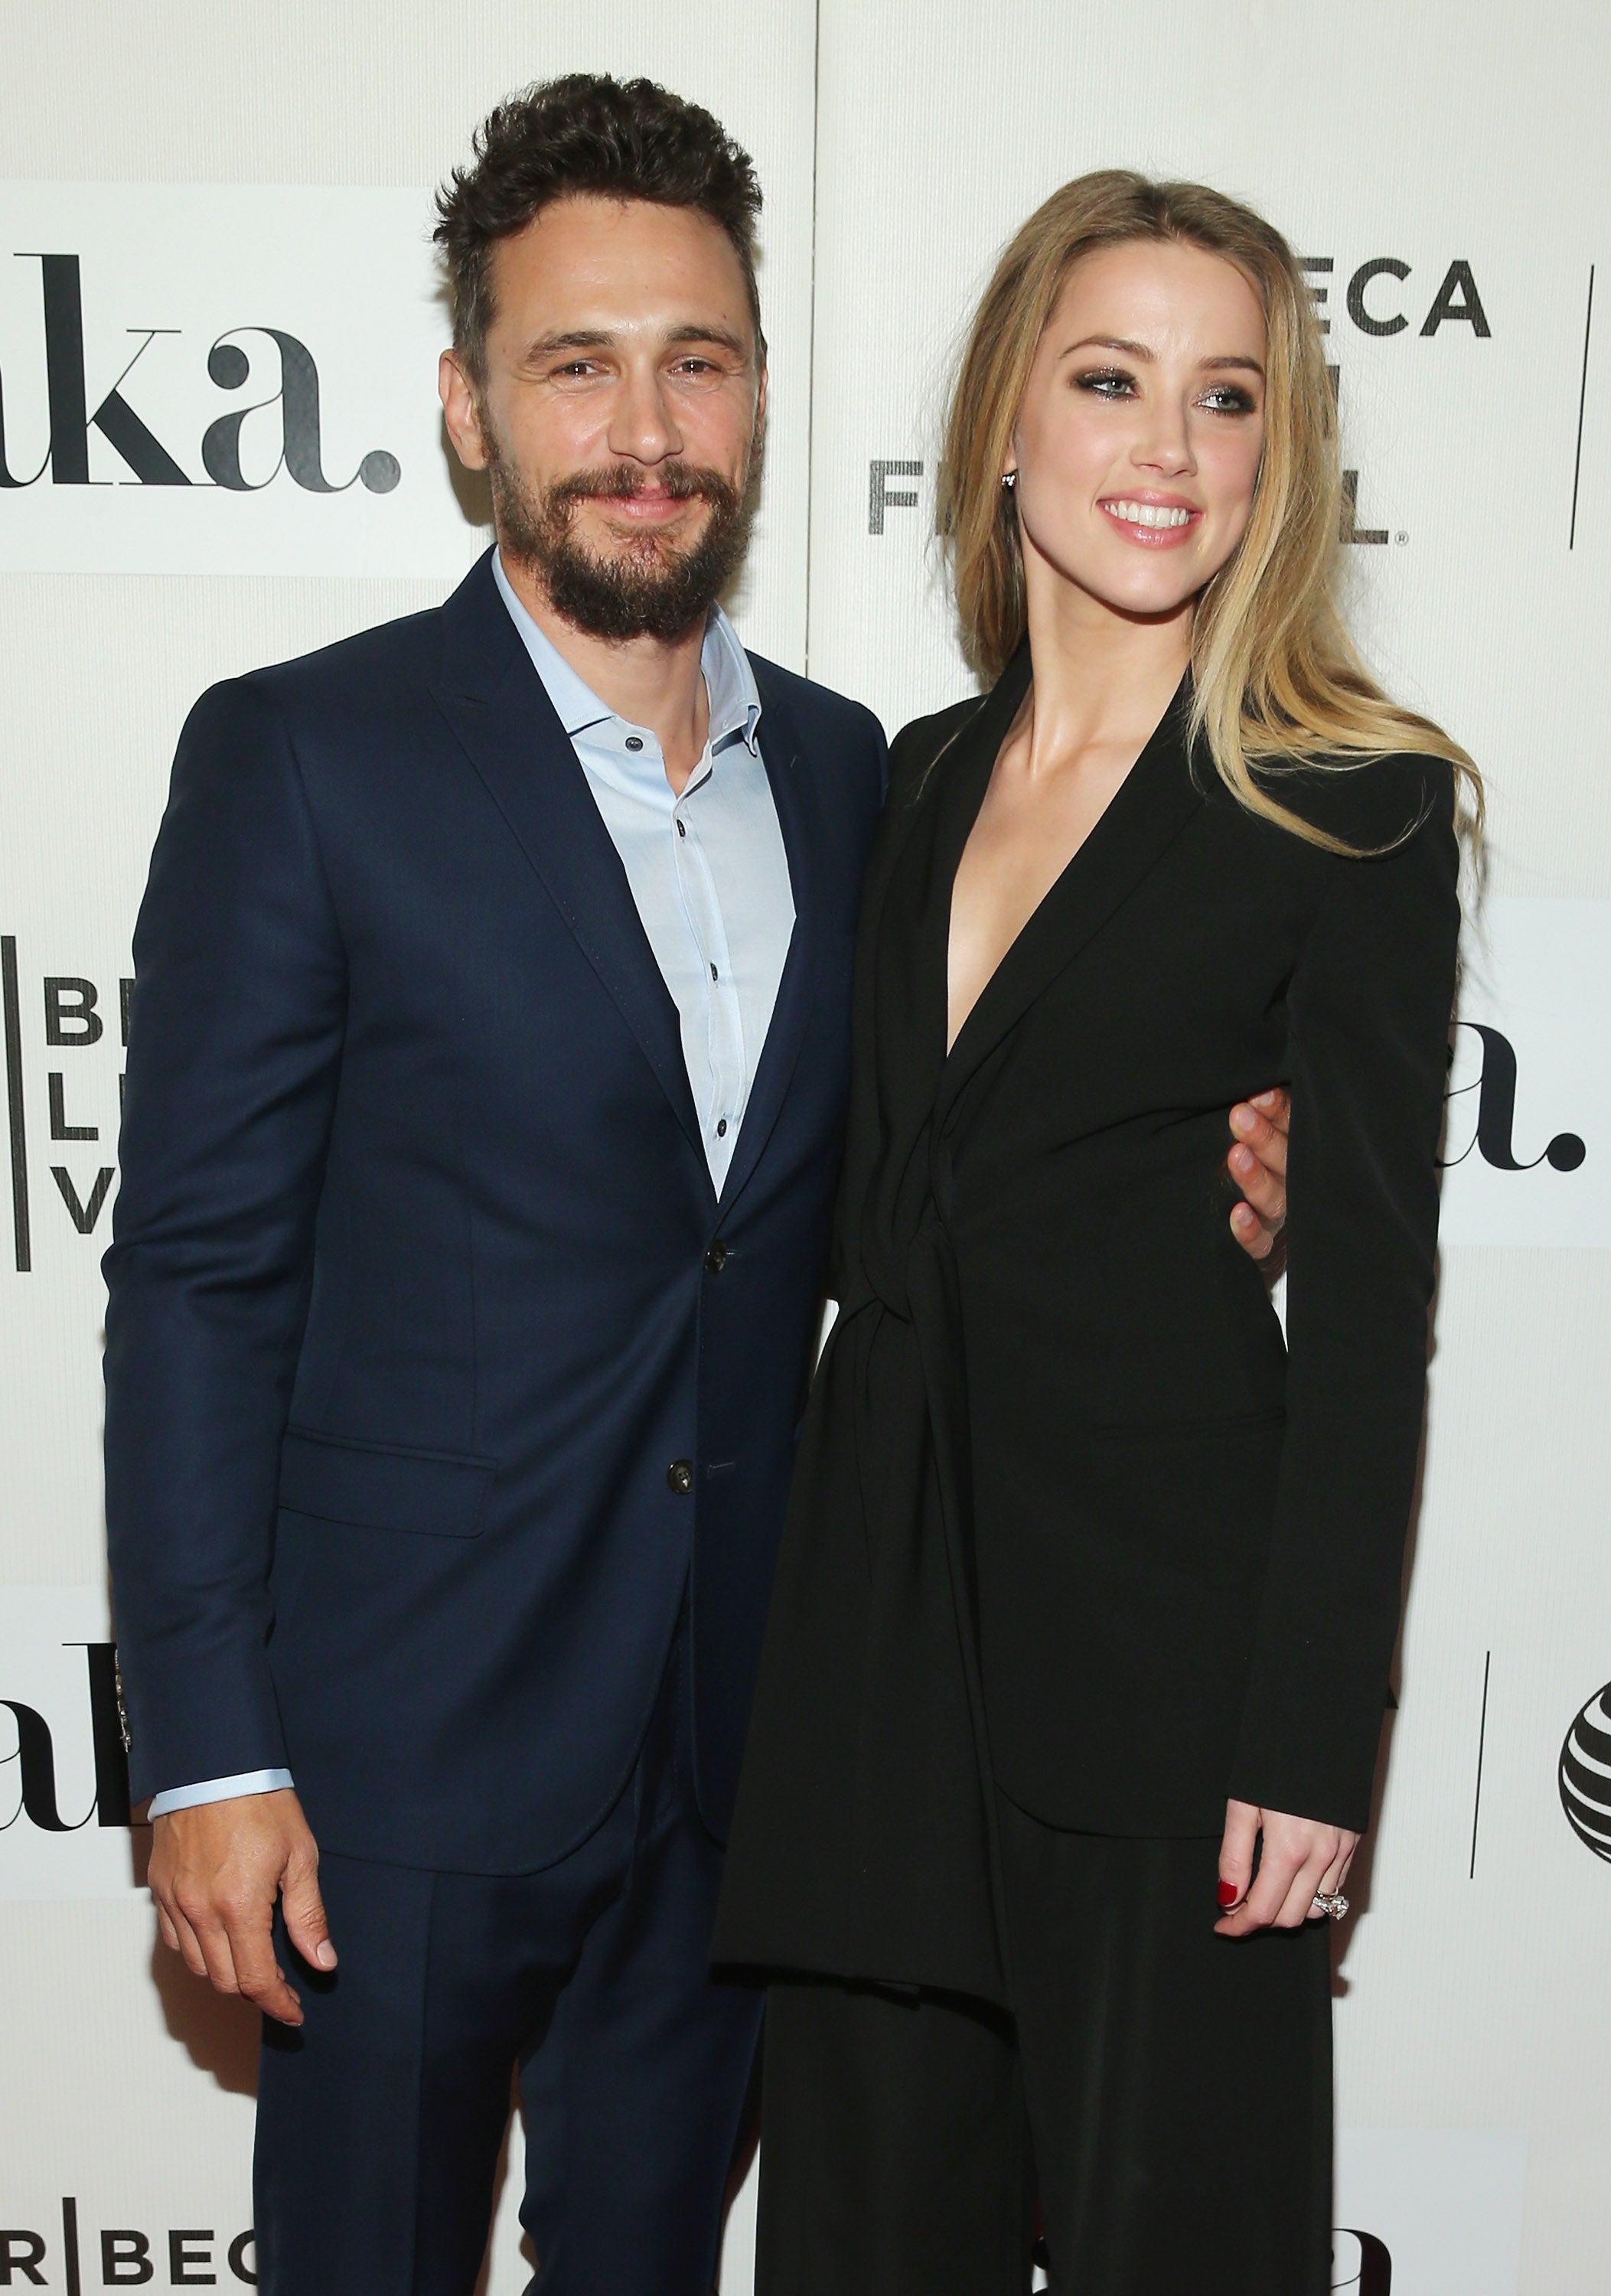 James Franco and Amber Heard attend the premiere of ‘The Adderall Diaries’ in 2015